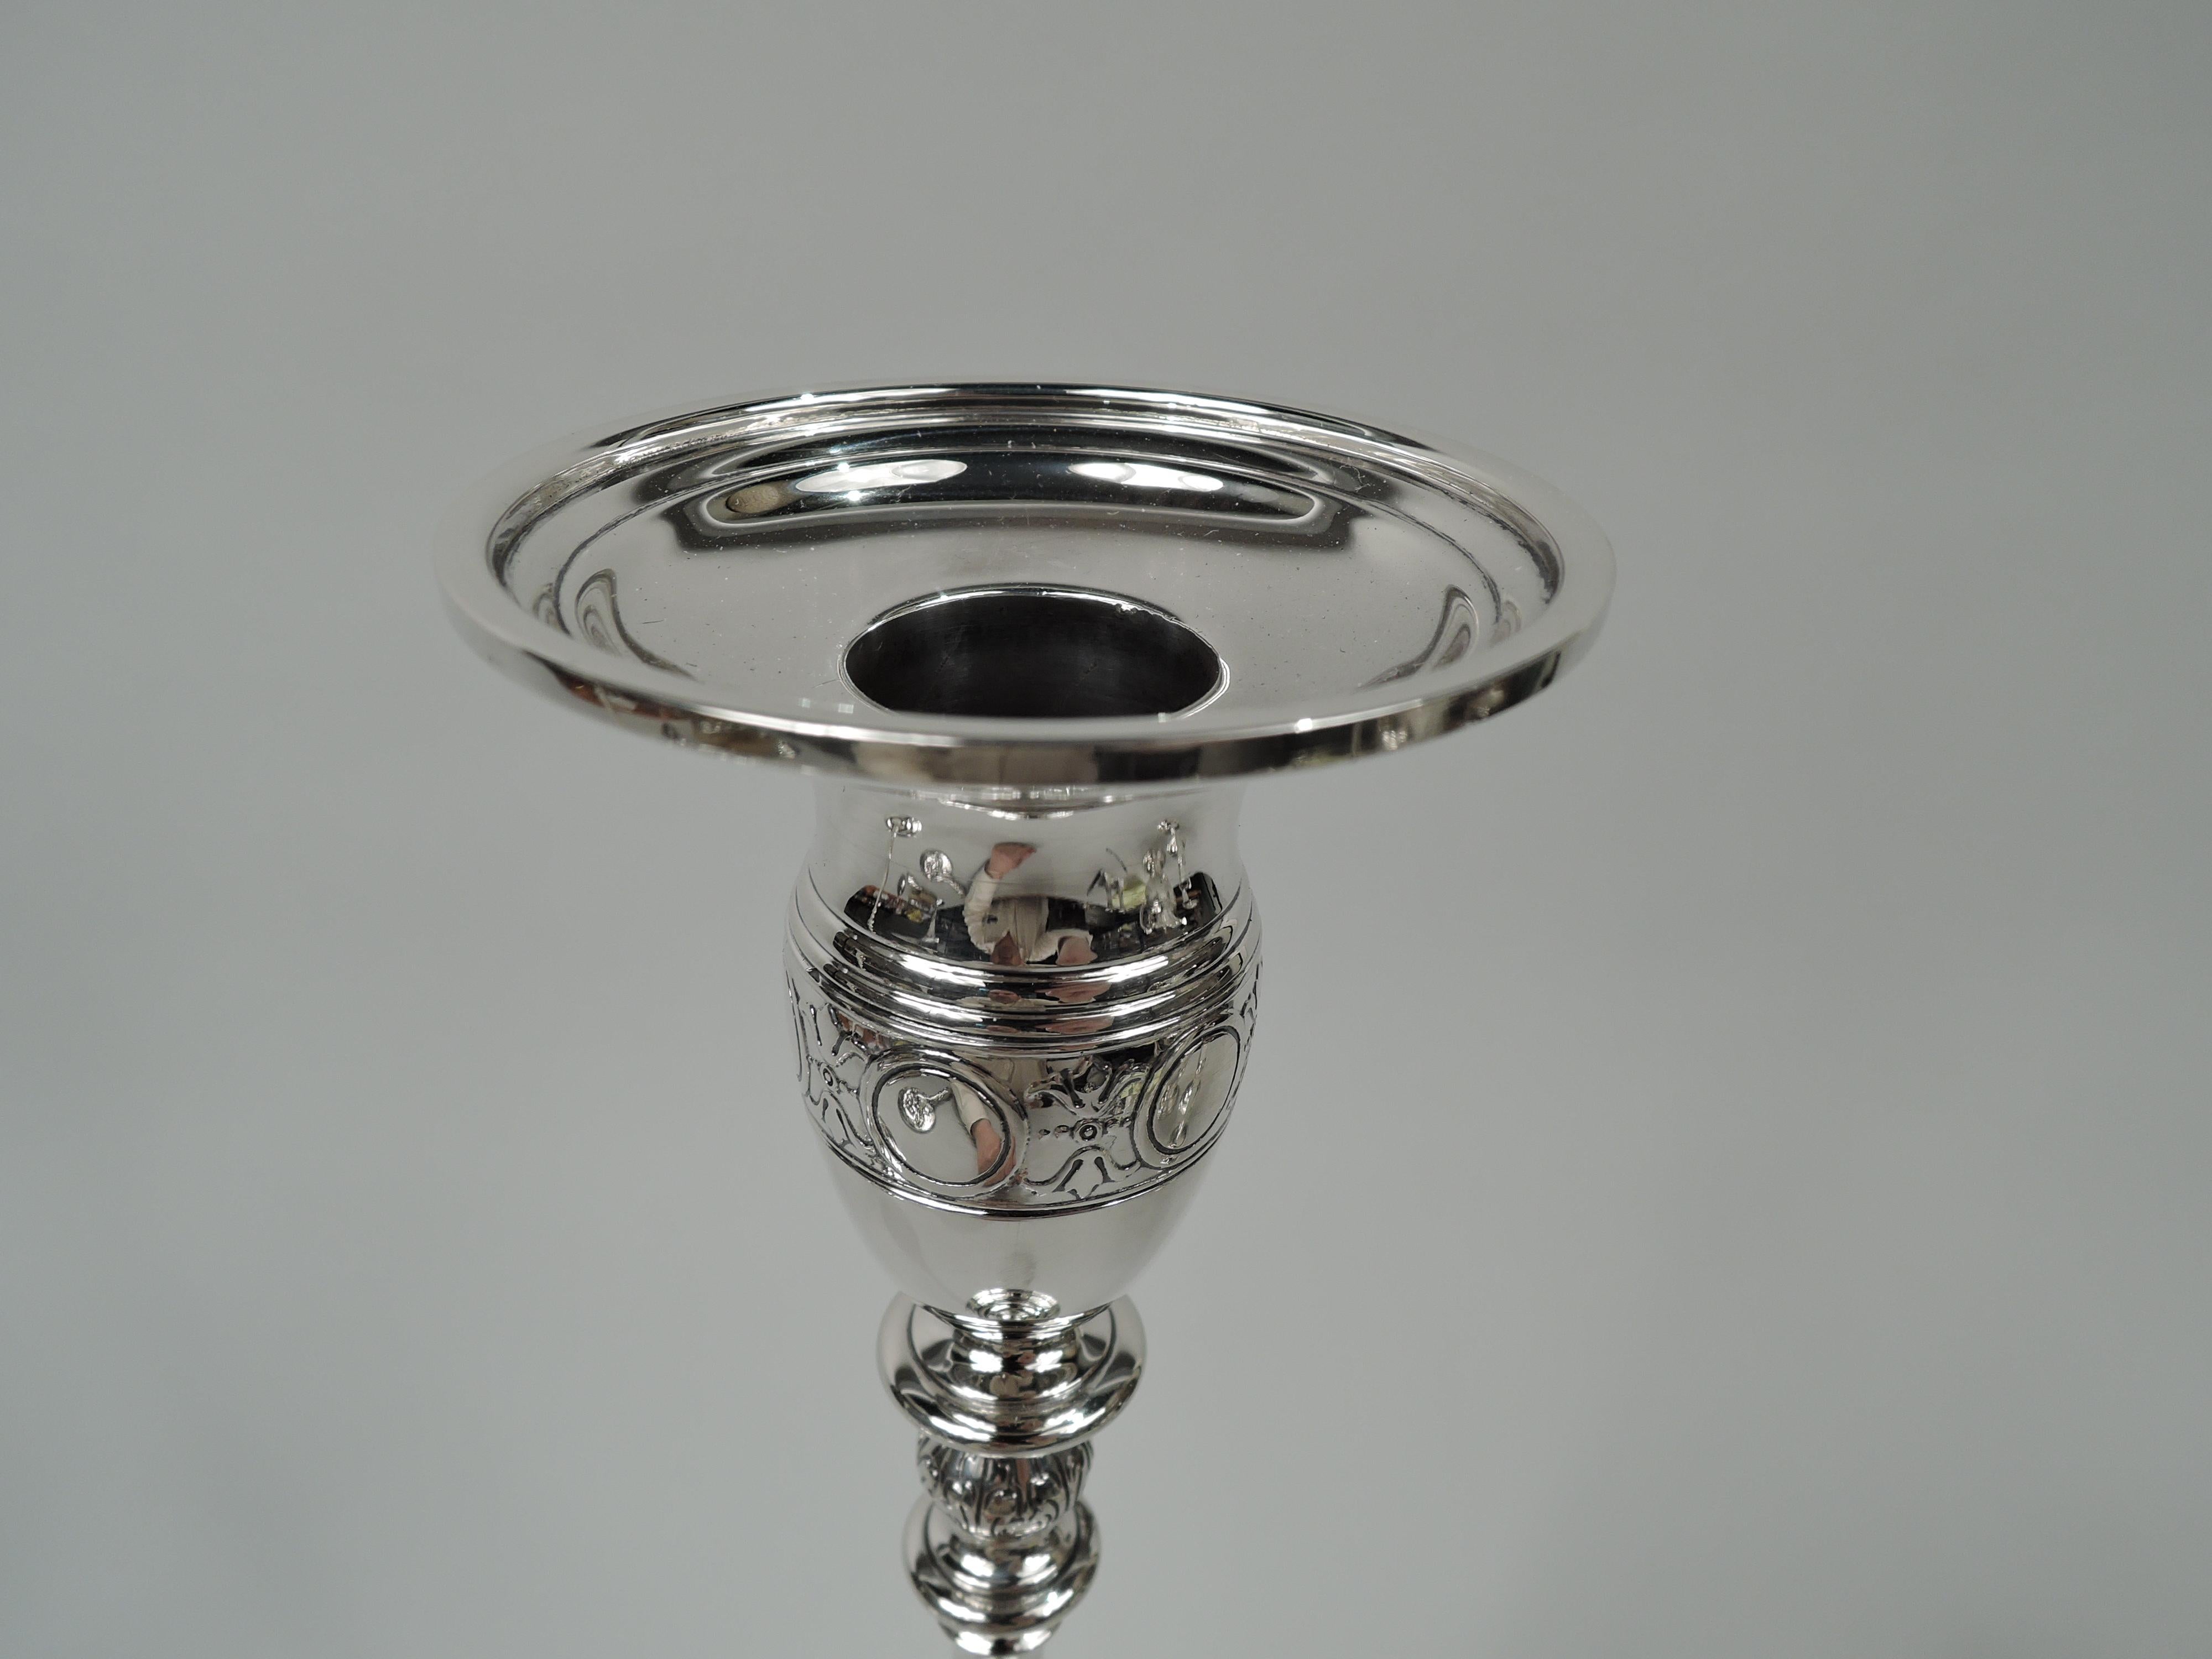 Art Deco sterling silver candlesticks. Made by Tiffany & Co. in New York, ca 1925. Ovoid socket with detachable bobeche on elongated and knopped baluster shaft; raised foot on round base. Engraved and acid-etched Modern Classical ornament including